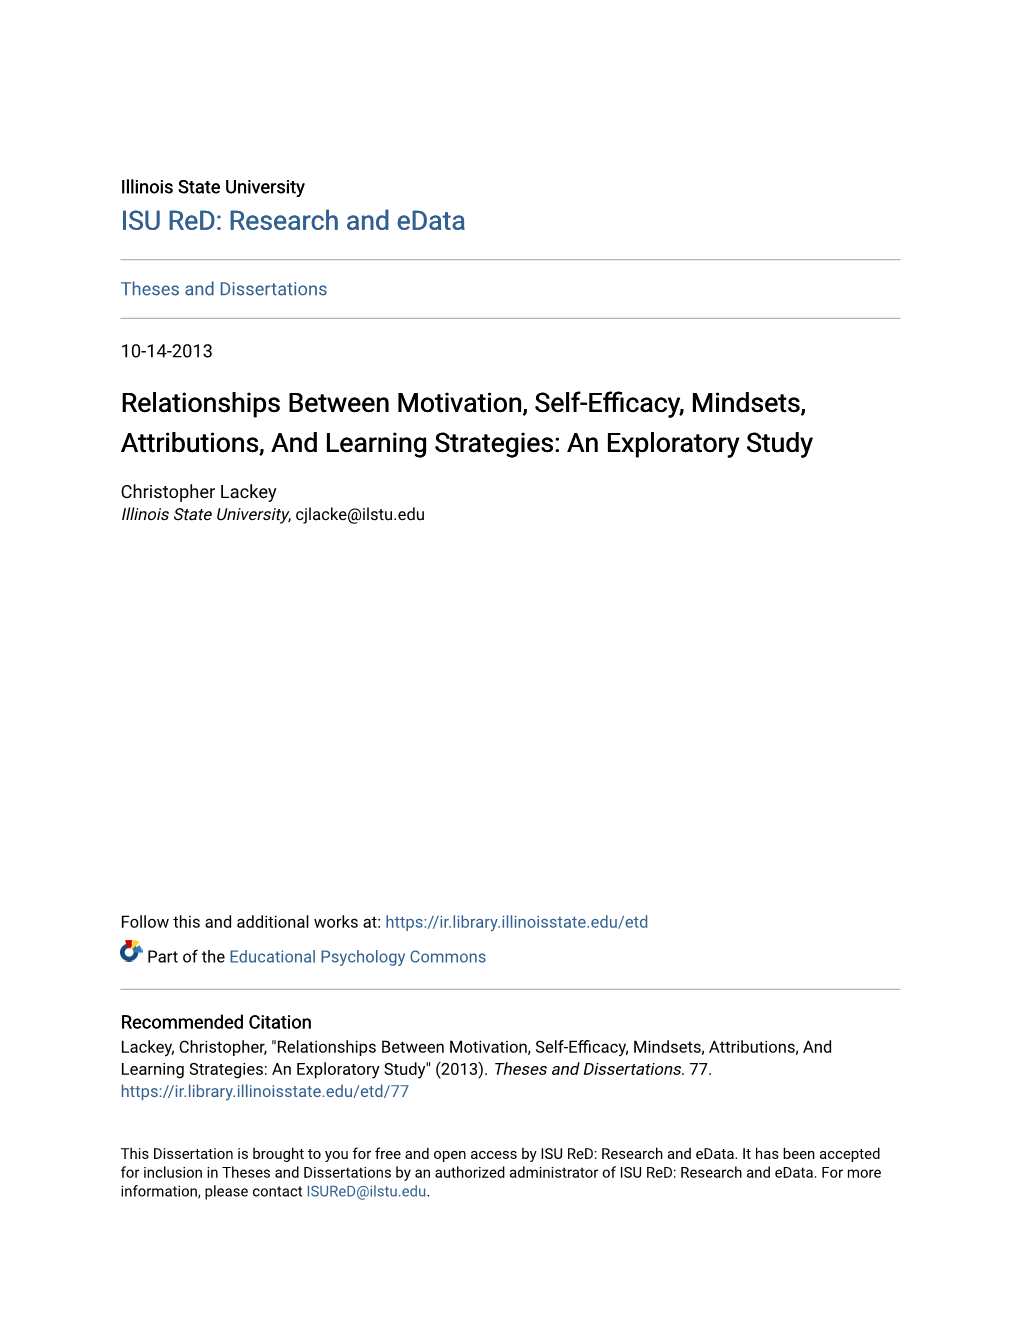 Relationships Between Motivation, Self-Efficacy, Mindsets, Attributions, and Learning Strategies: an Exploratory Study